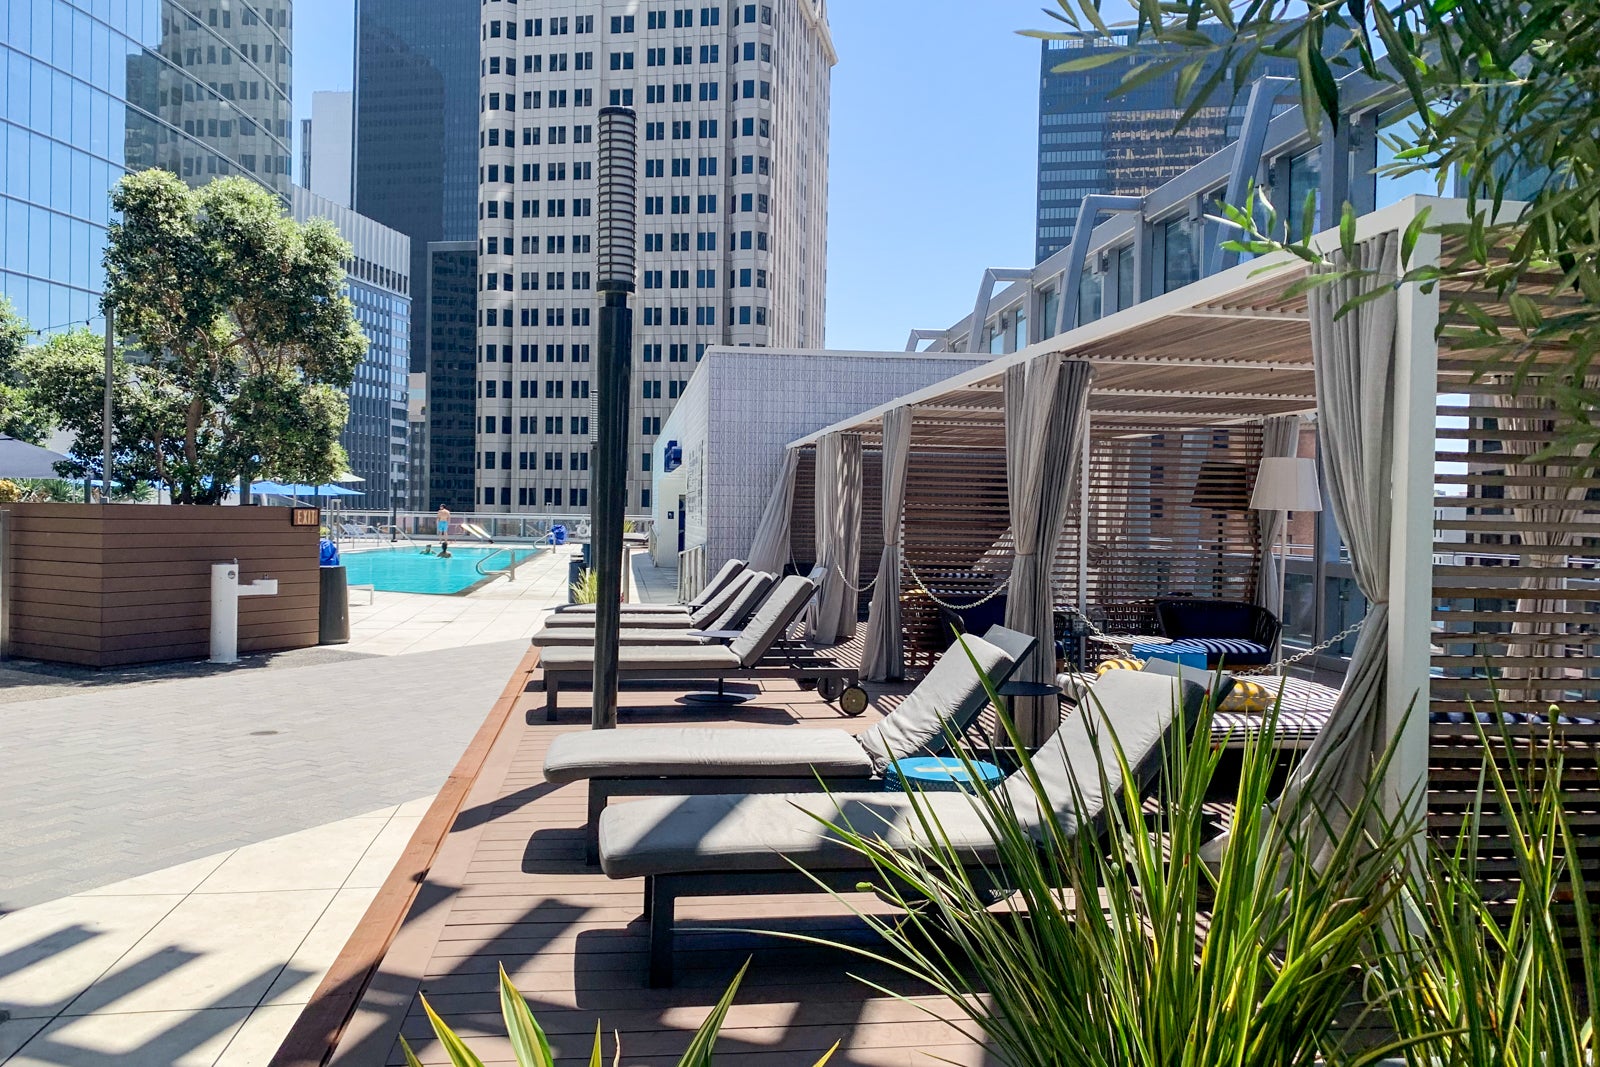 lounge chairs flank a rooftop hotel pool surrounded by skyscrapers